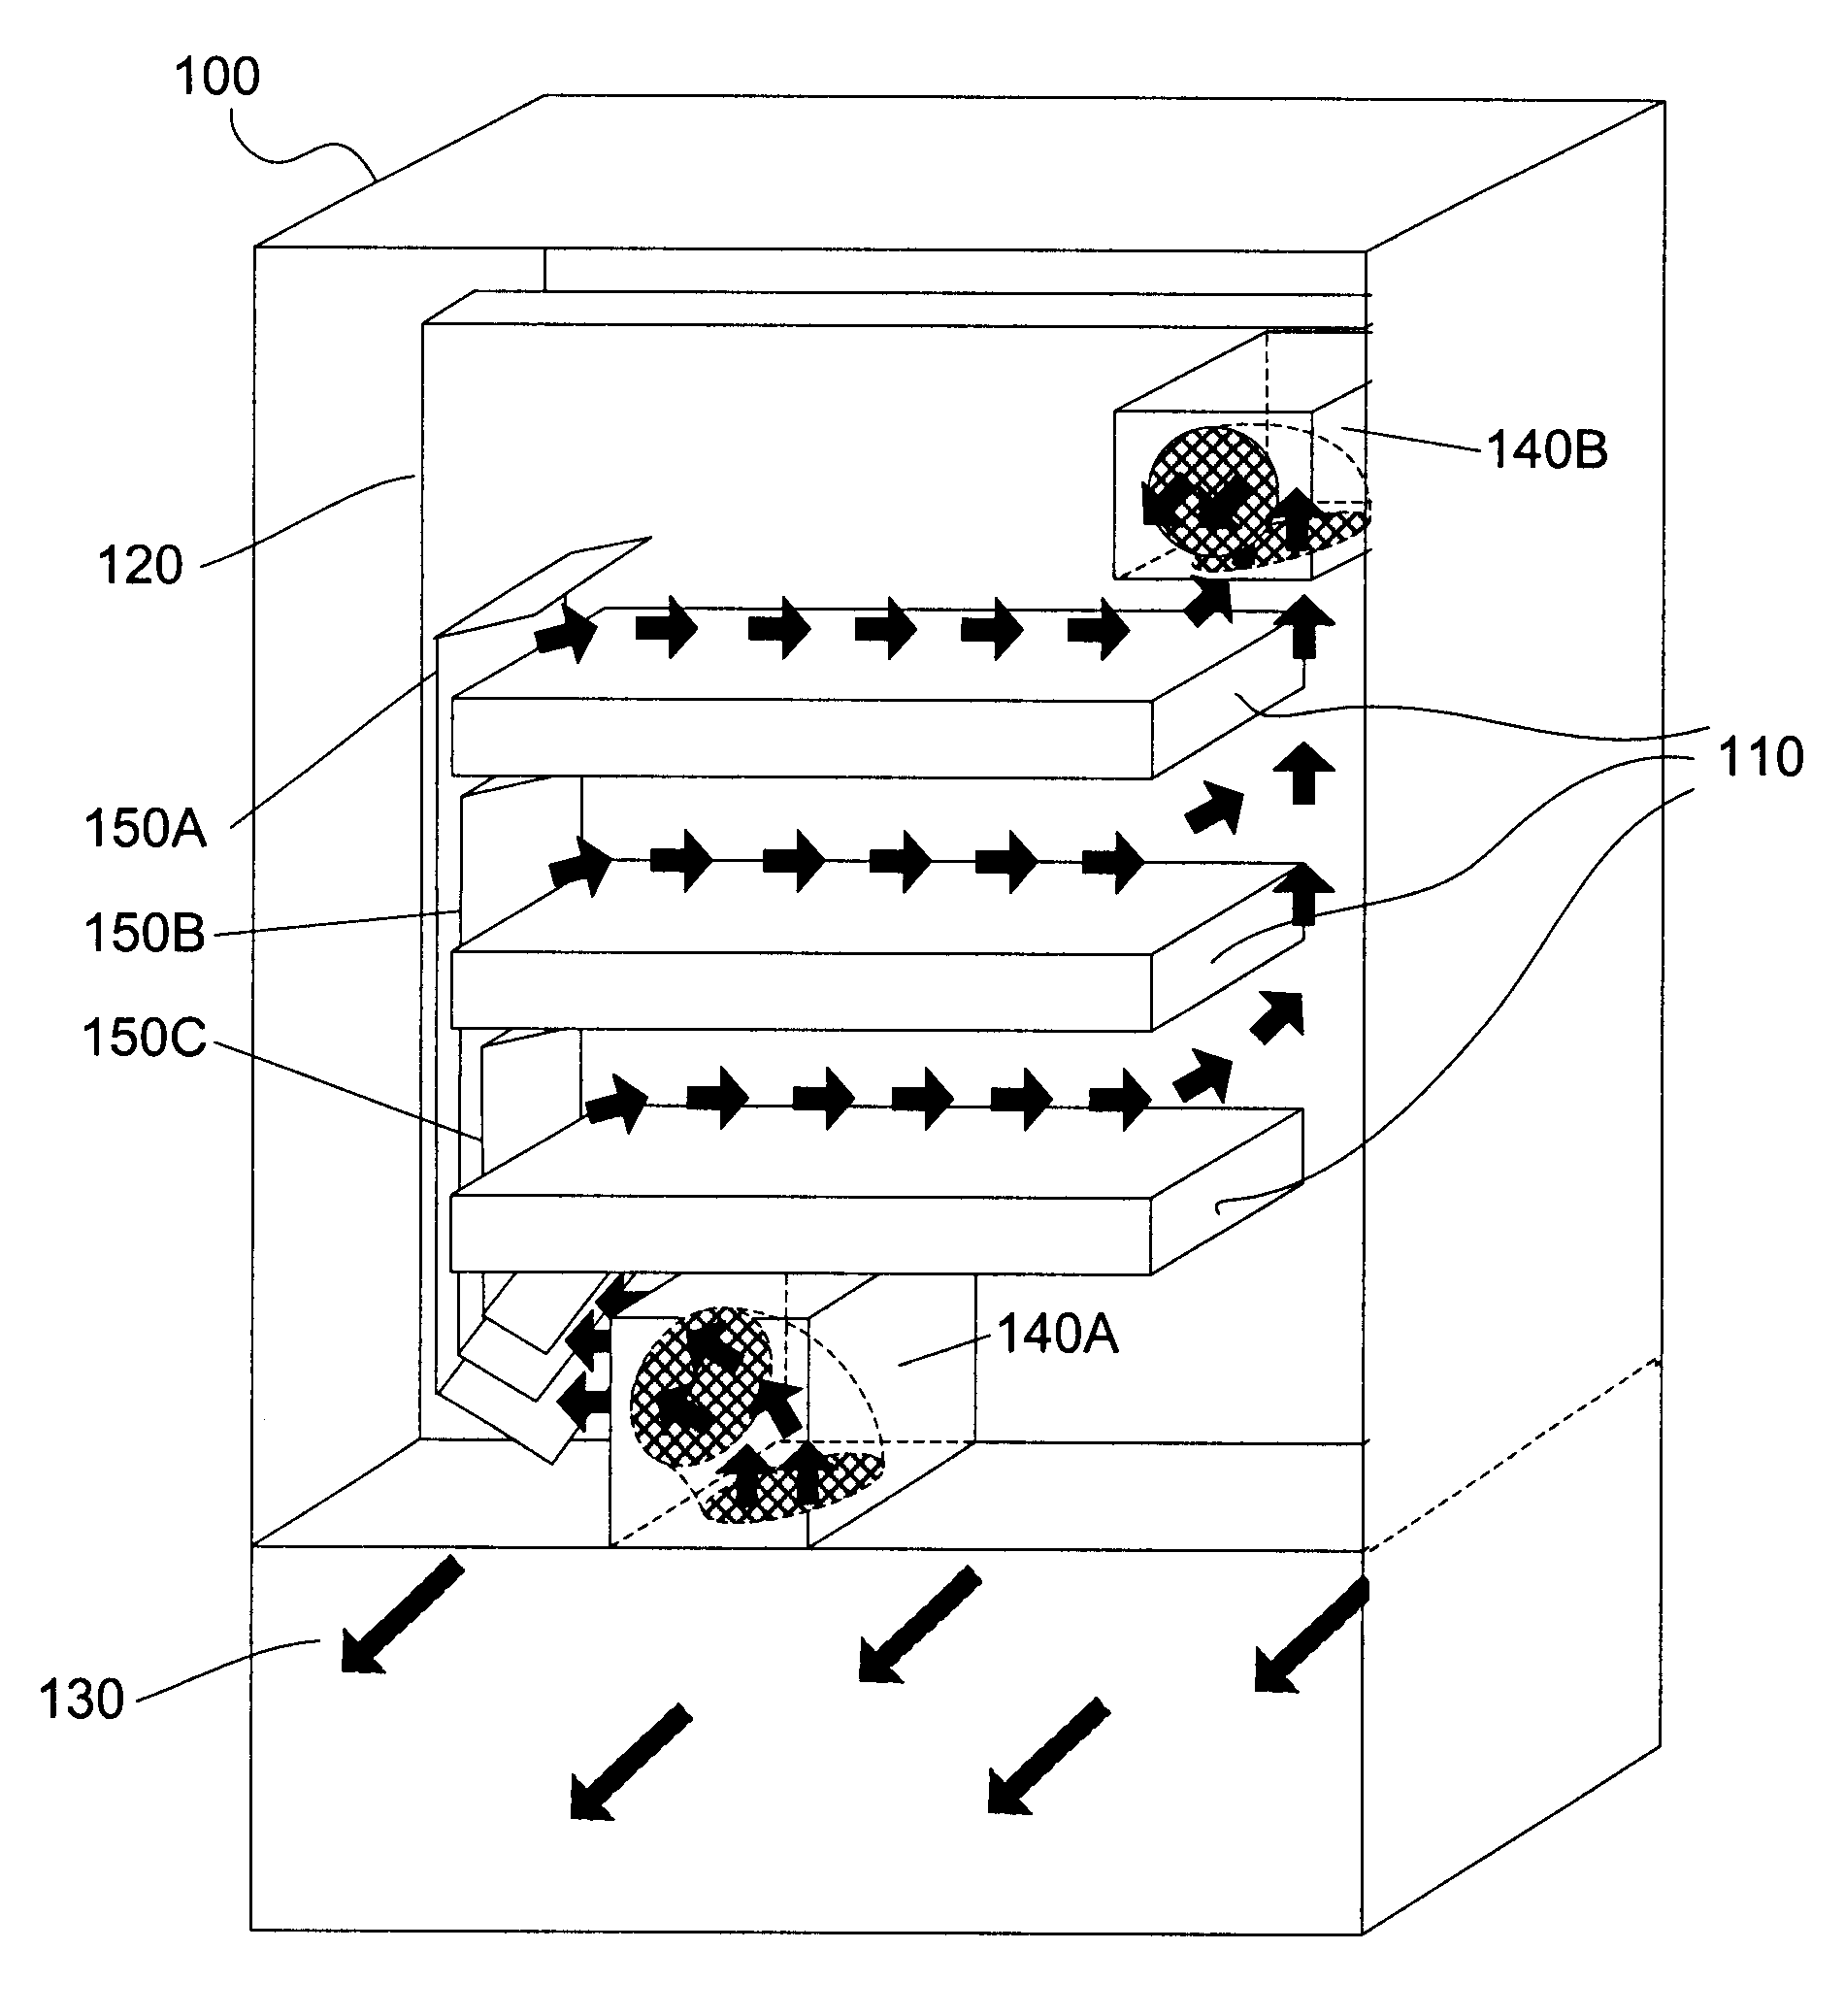 Apparatus and method for directing airflow in three dimensions to cool system components